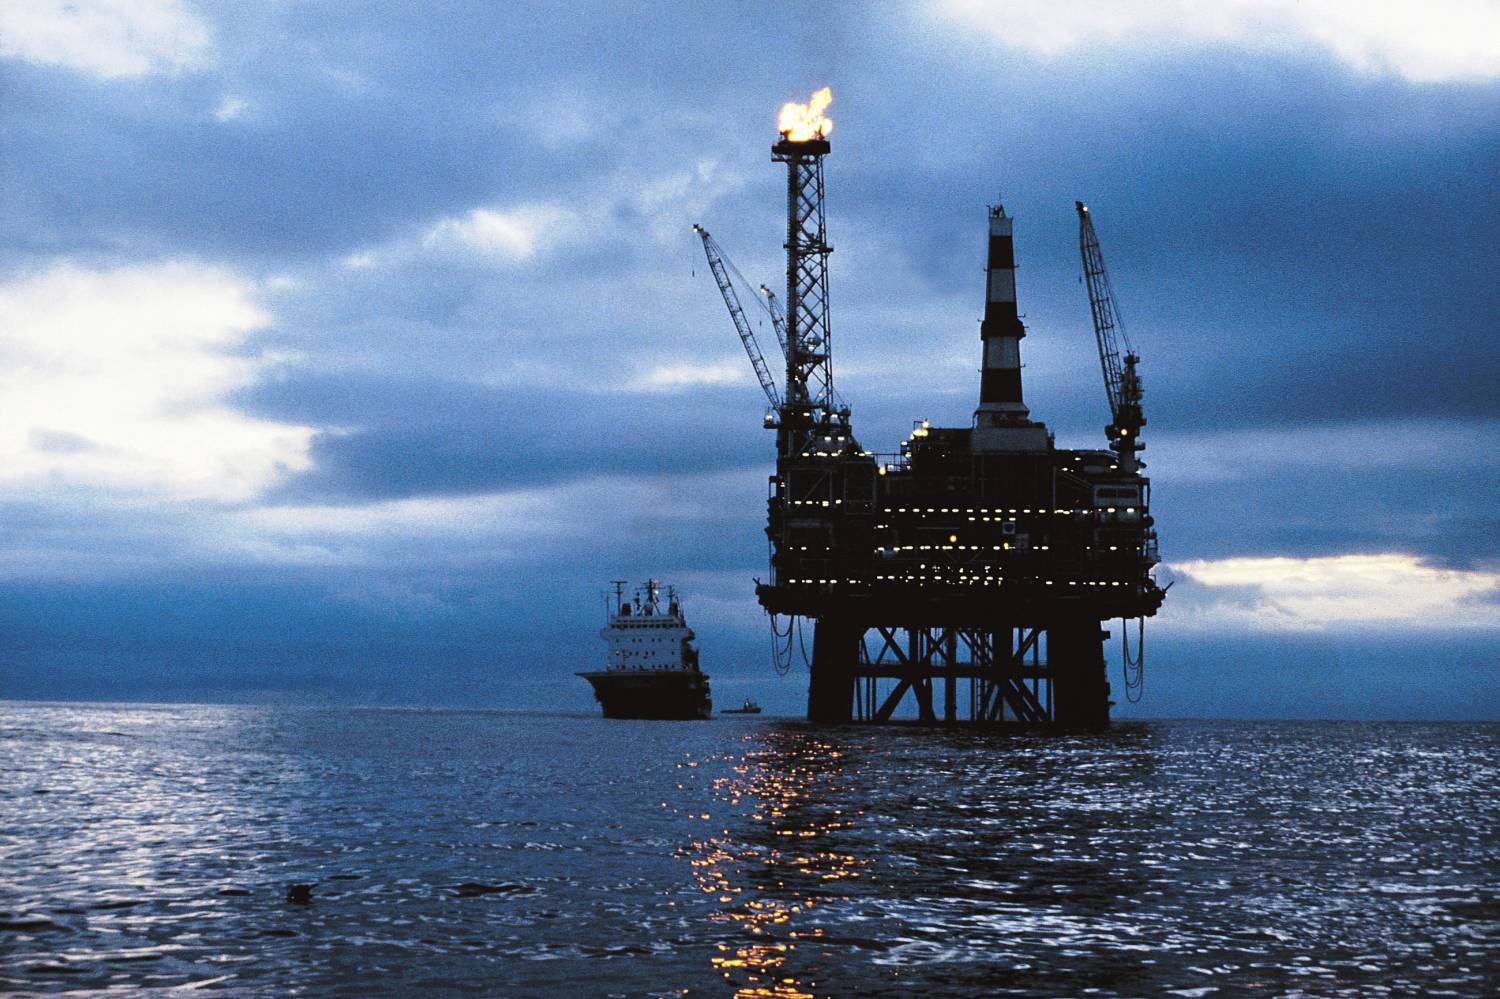 Black Sea gas deposits – an overlooked reason for Russia’s occupation of Crimea